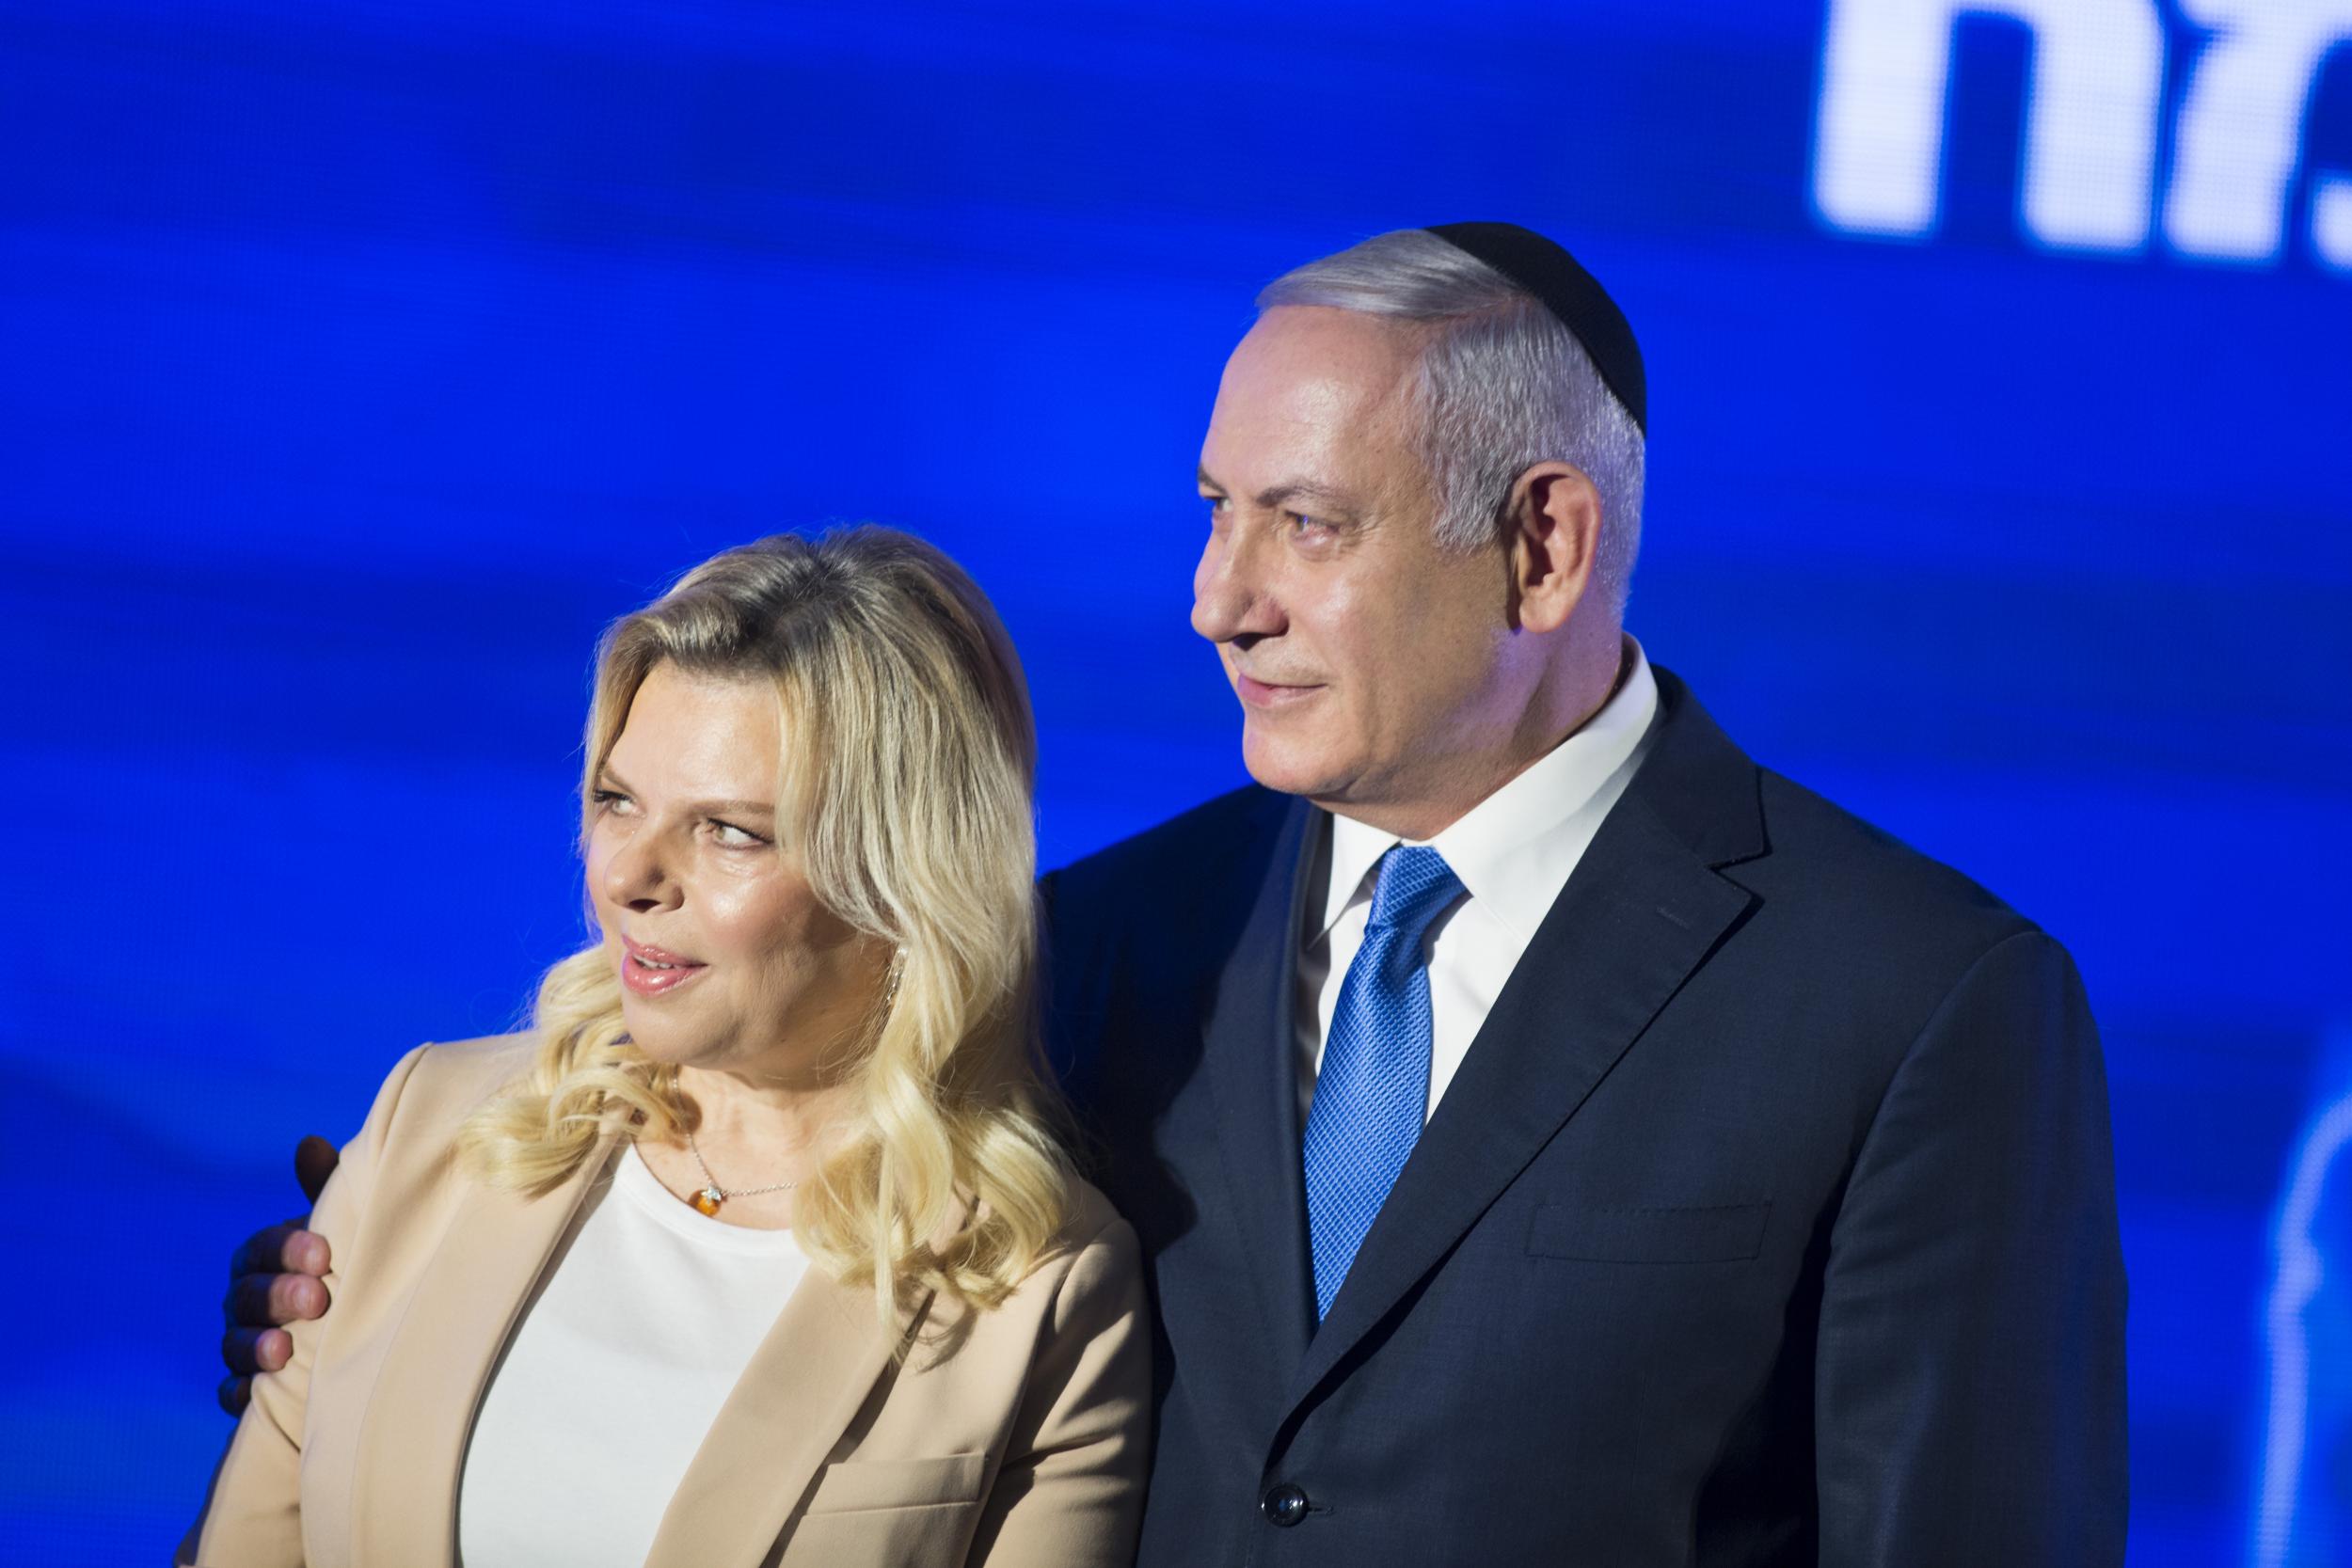 Benjamin Netanyahu stands by his wife Sara on the day Israel Securities Authority recommended indicting them both on bribery and other corruption charges